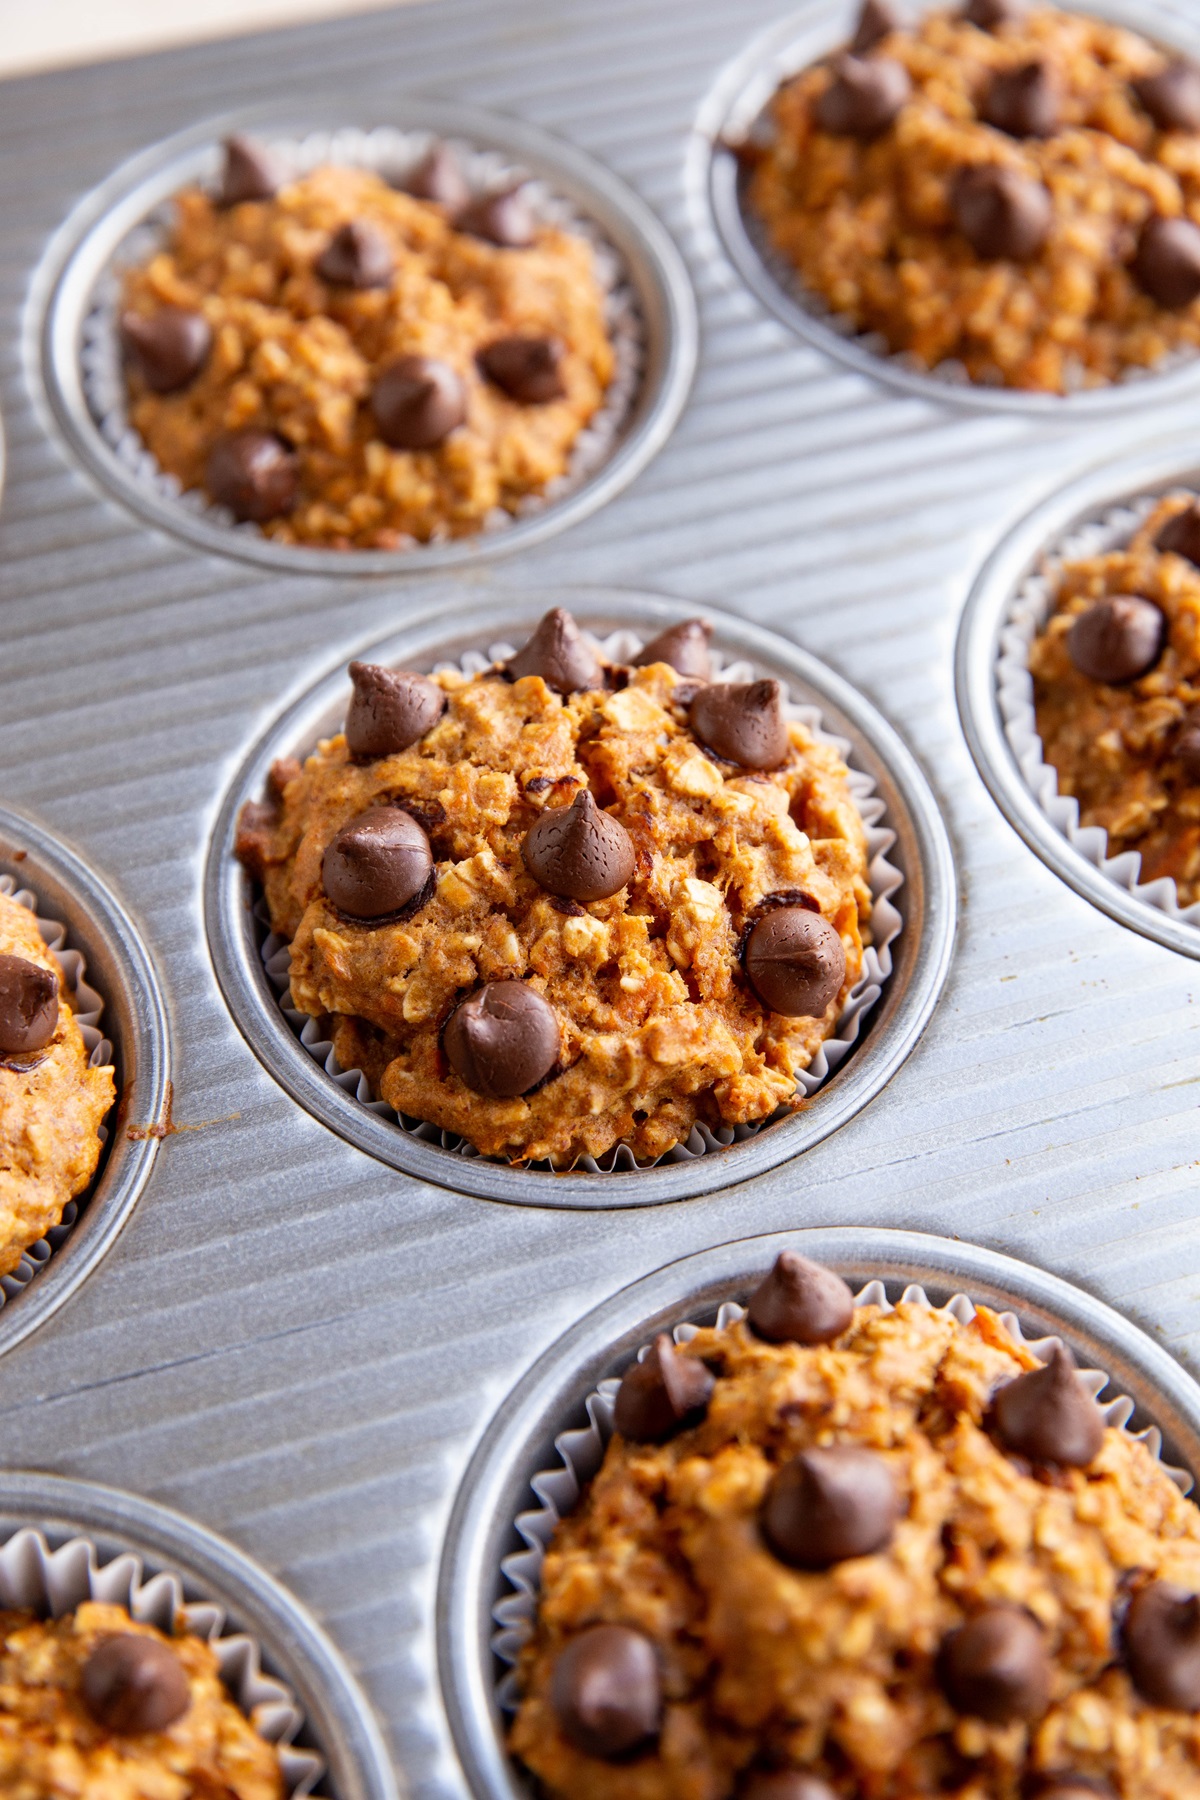 Muffin tray of baked sweet potato muffin cups.